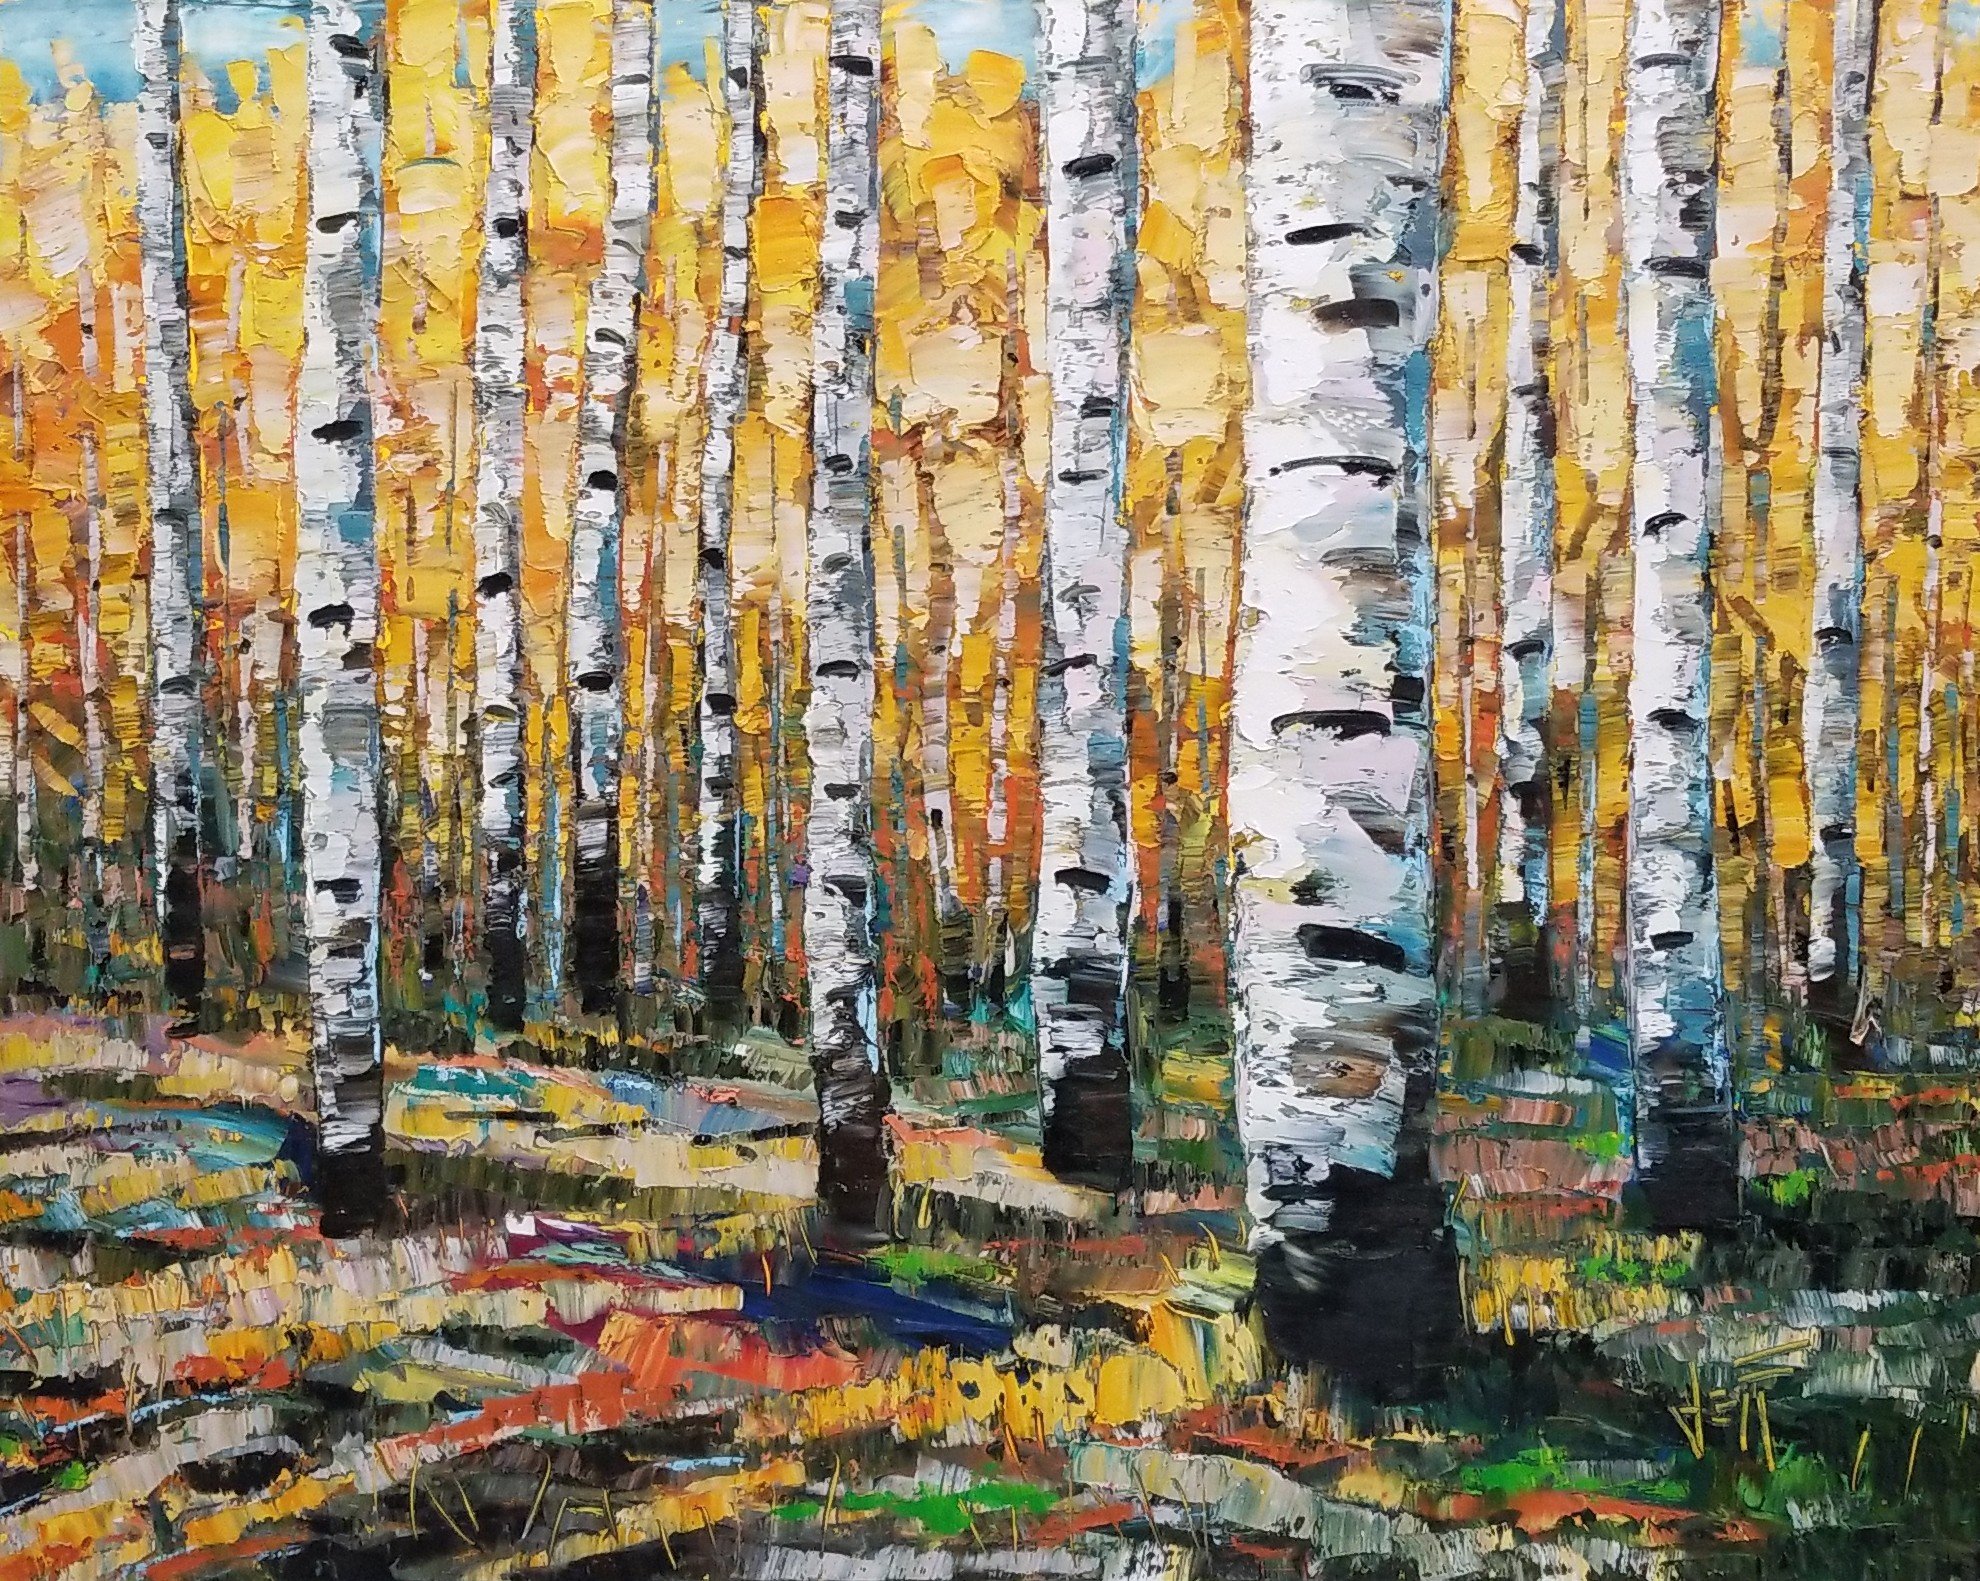  Flaming Forest-oil on canvas 48” x 60”   Boutin Gallery 